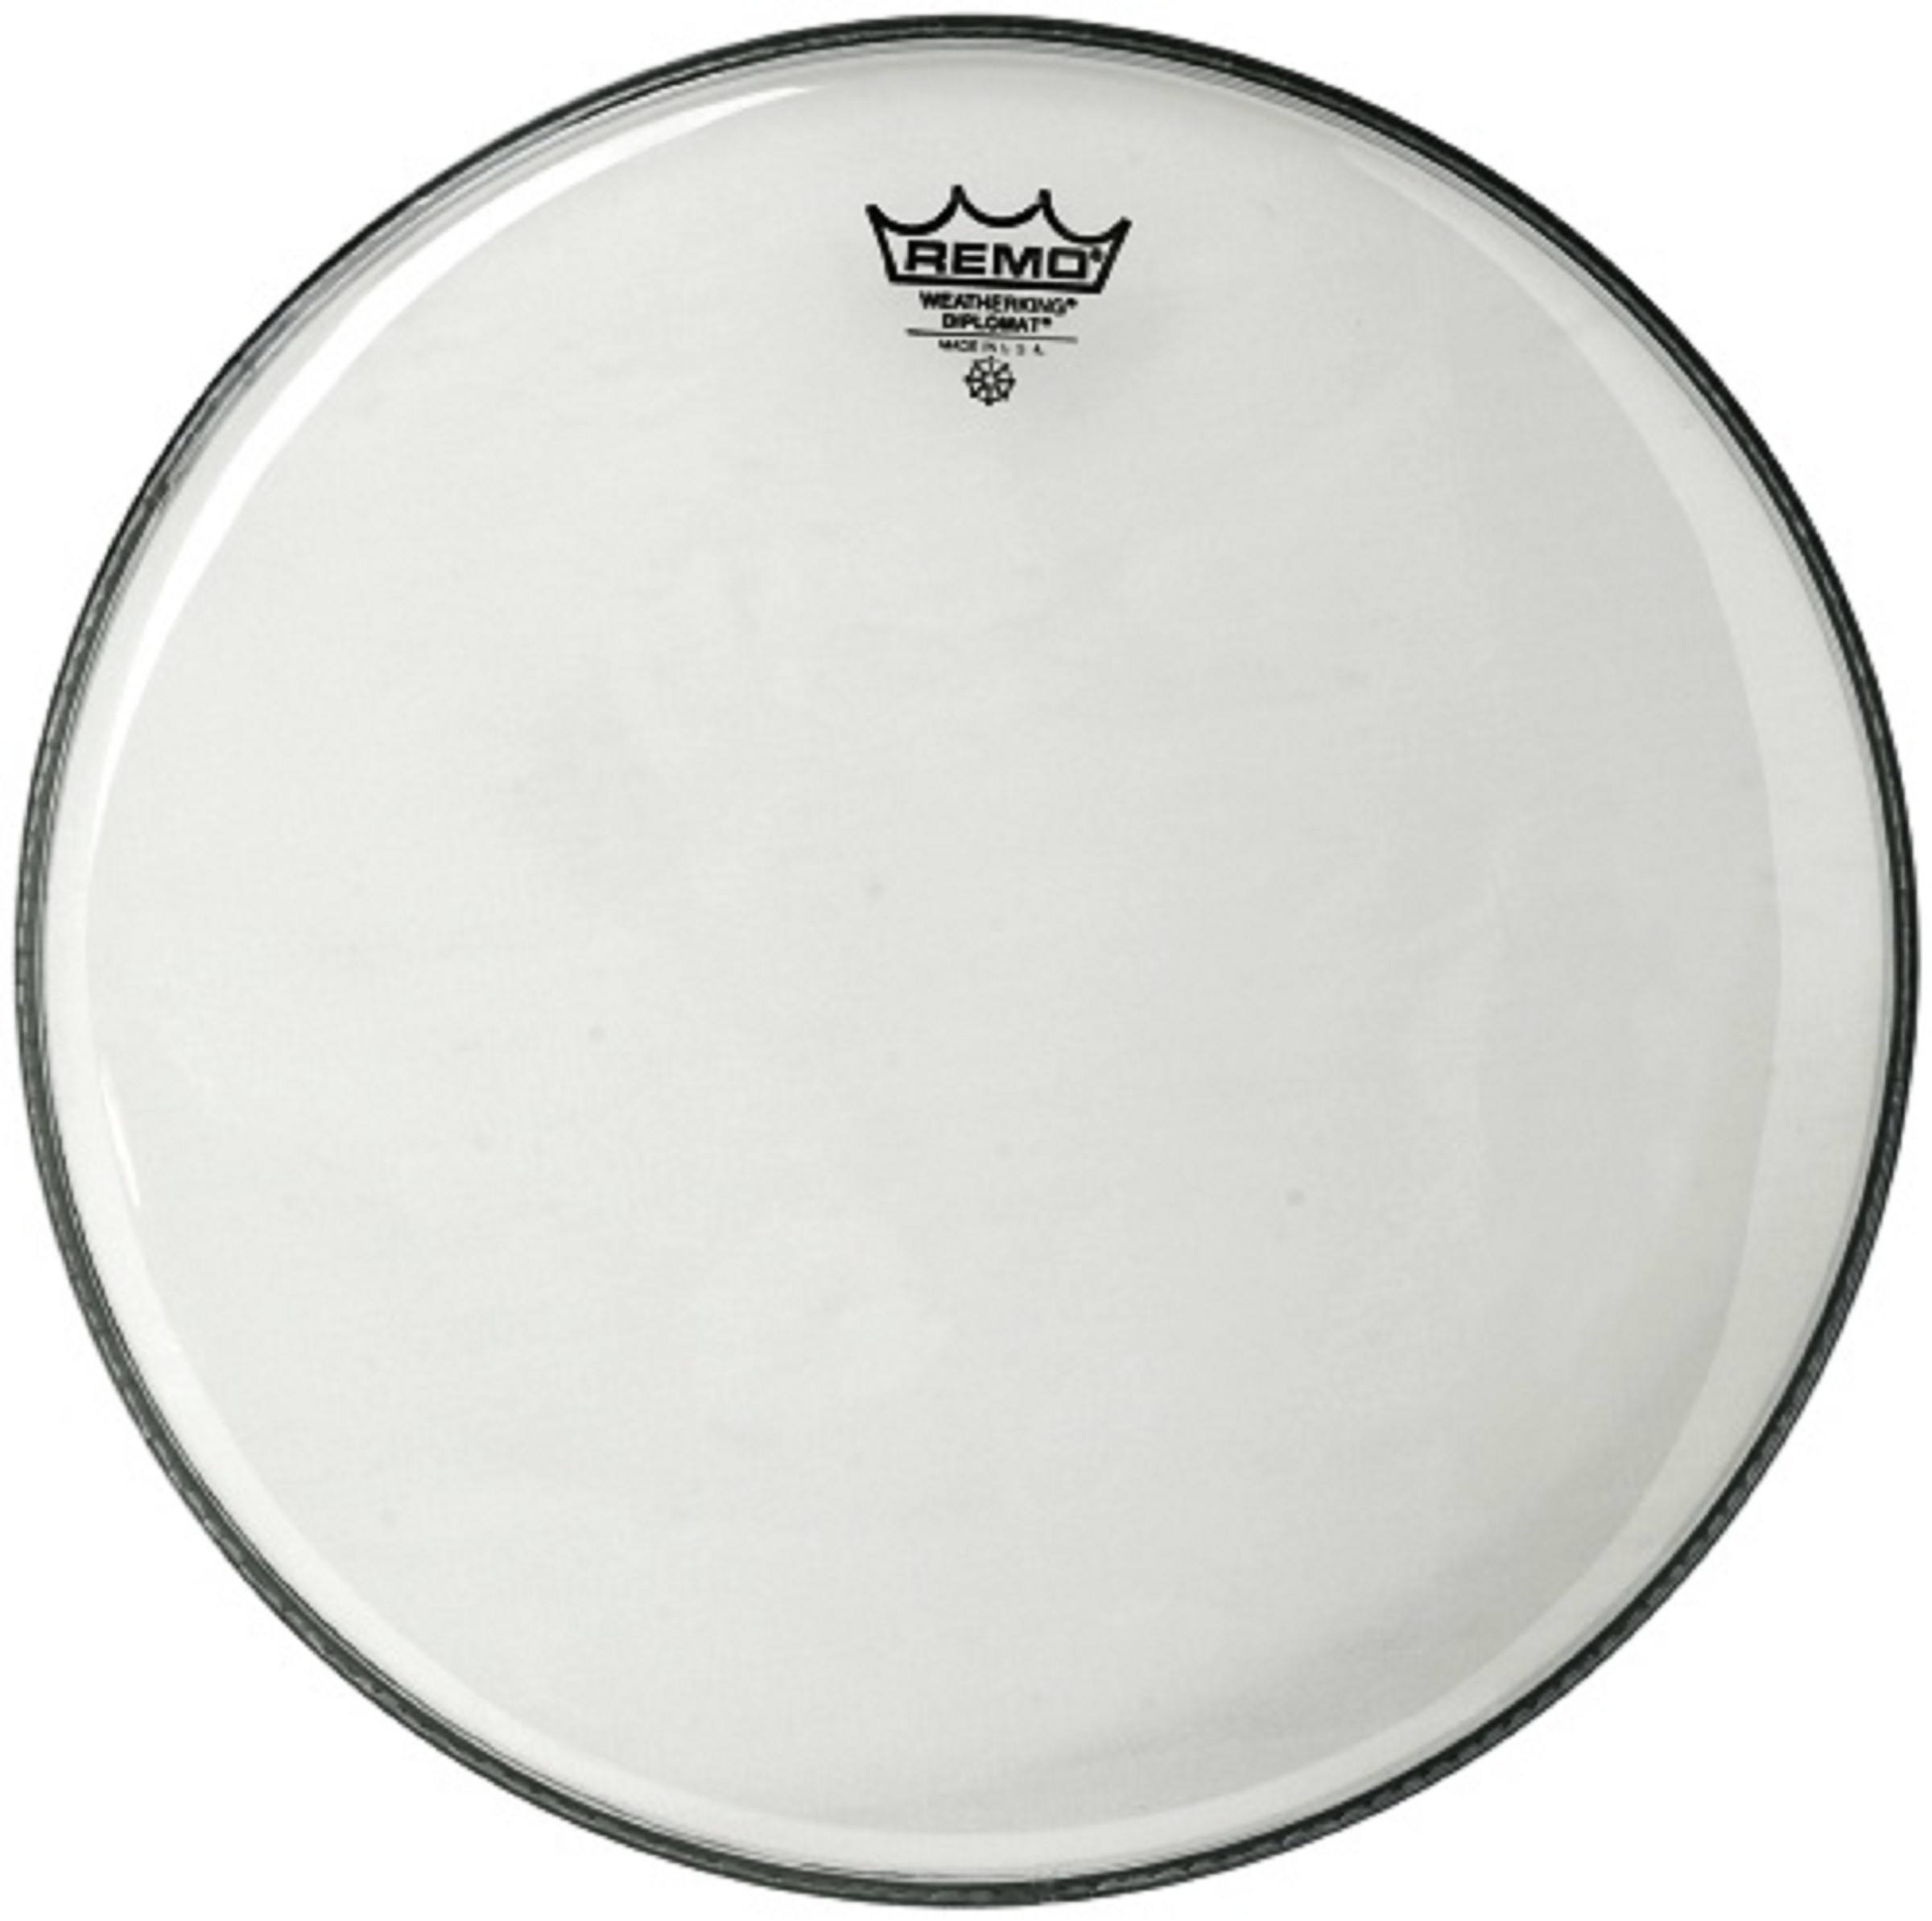 Remo Fell Diplomat 10" Clear